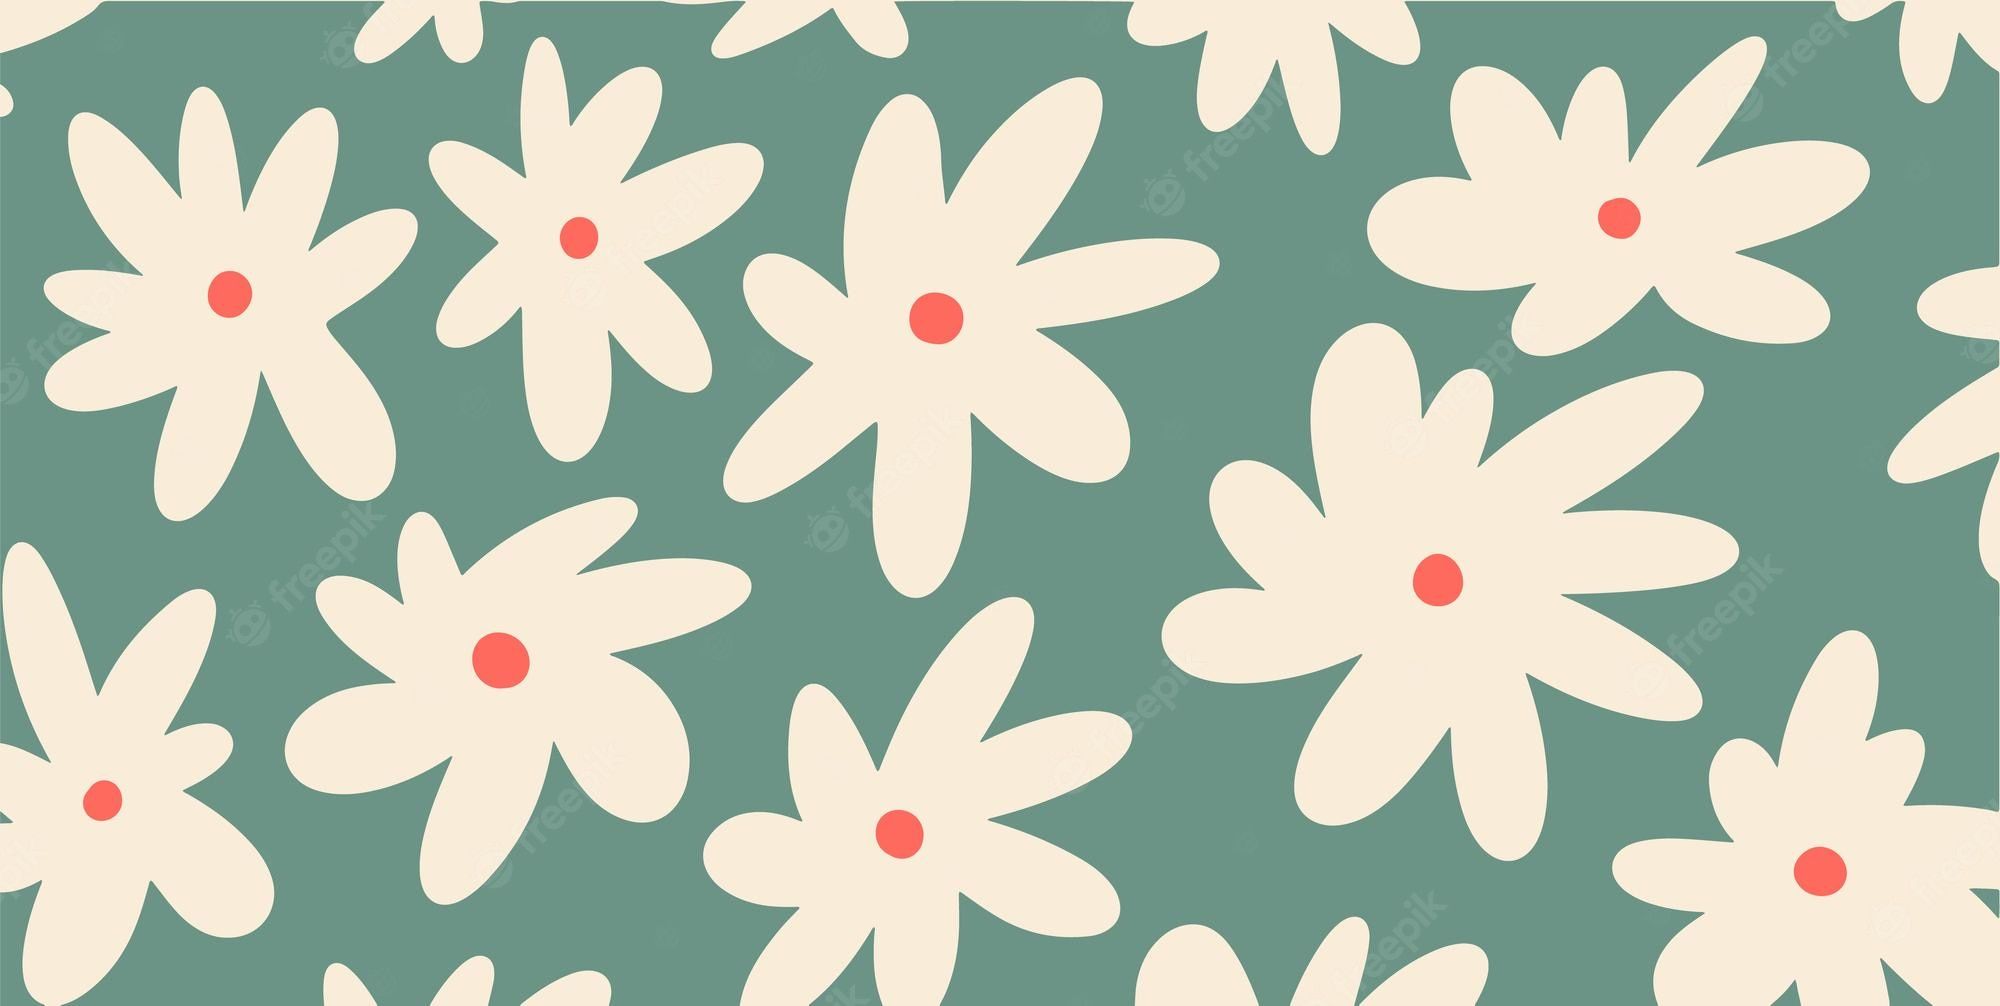 A pattern of white flowers with red centers on a green background - 60s, spring, 70s, daisy, illustration